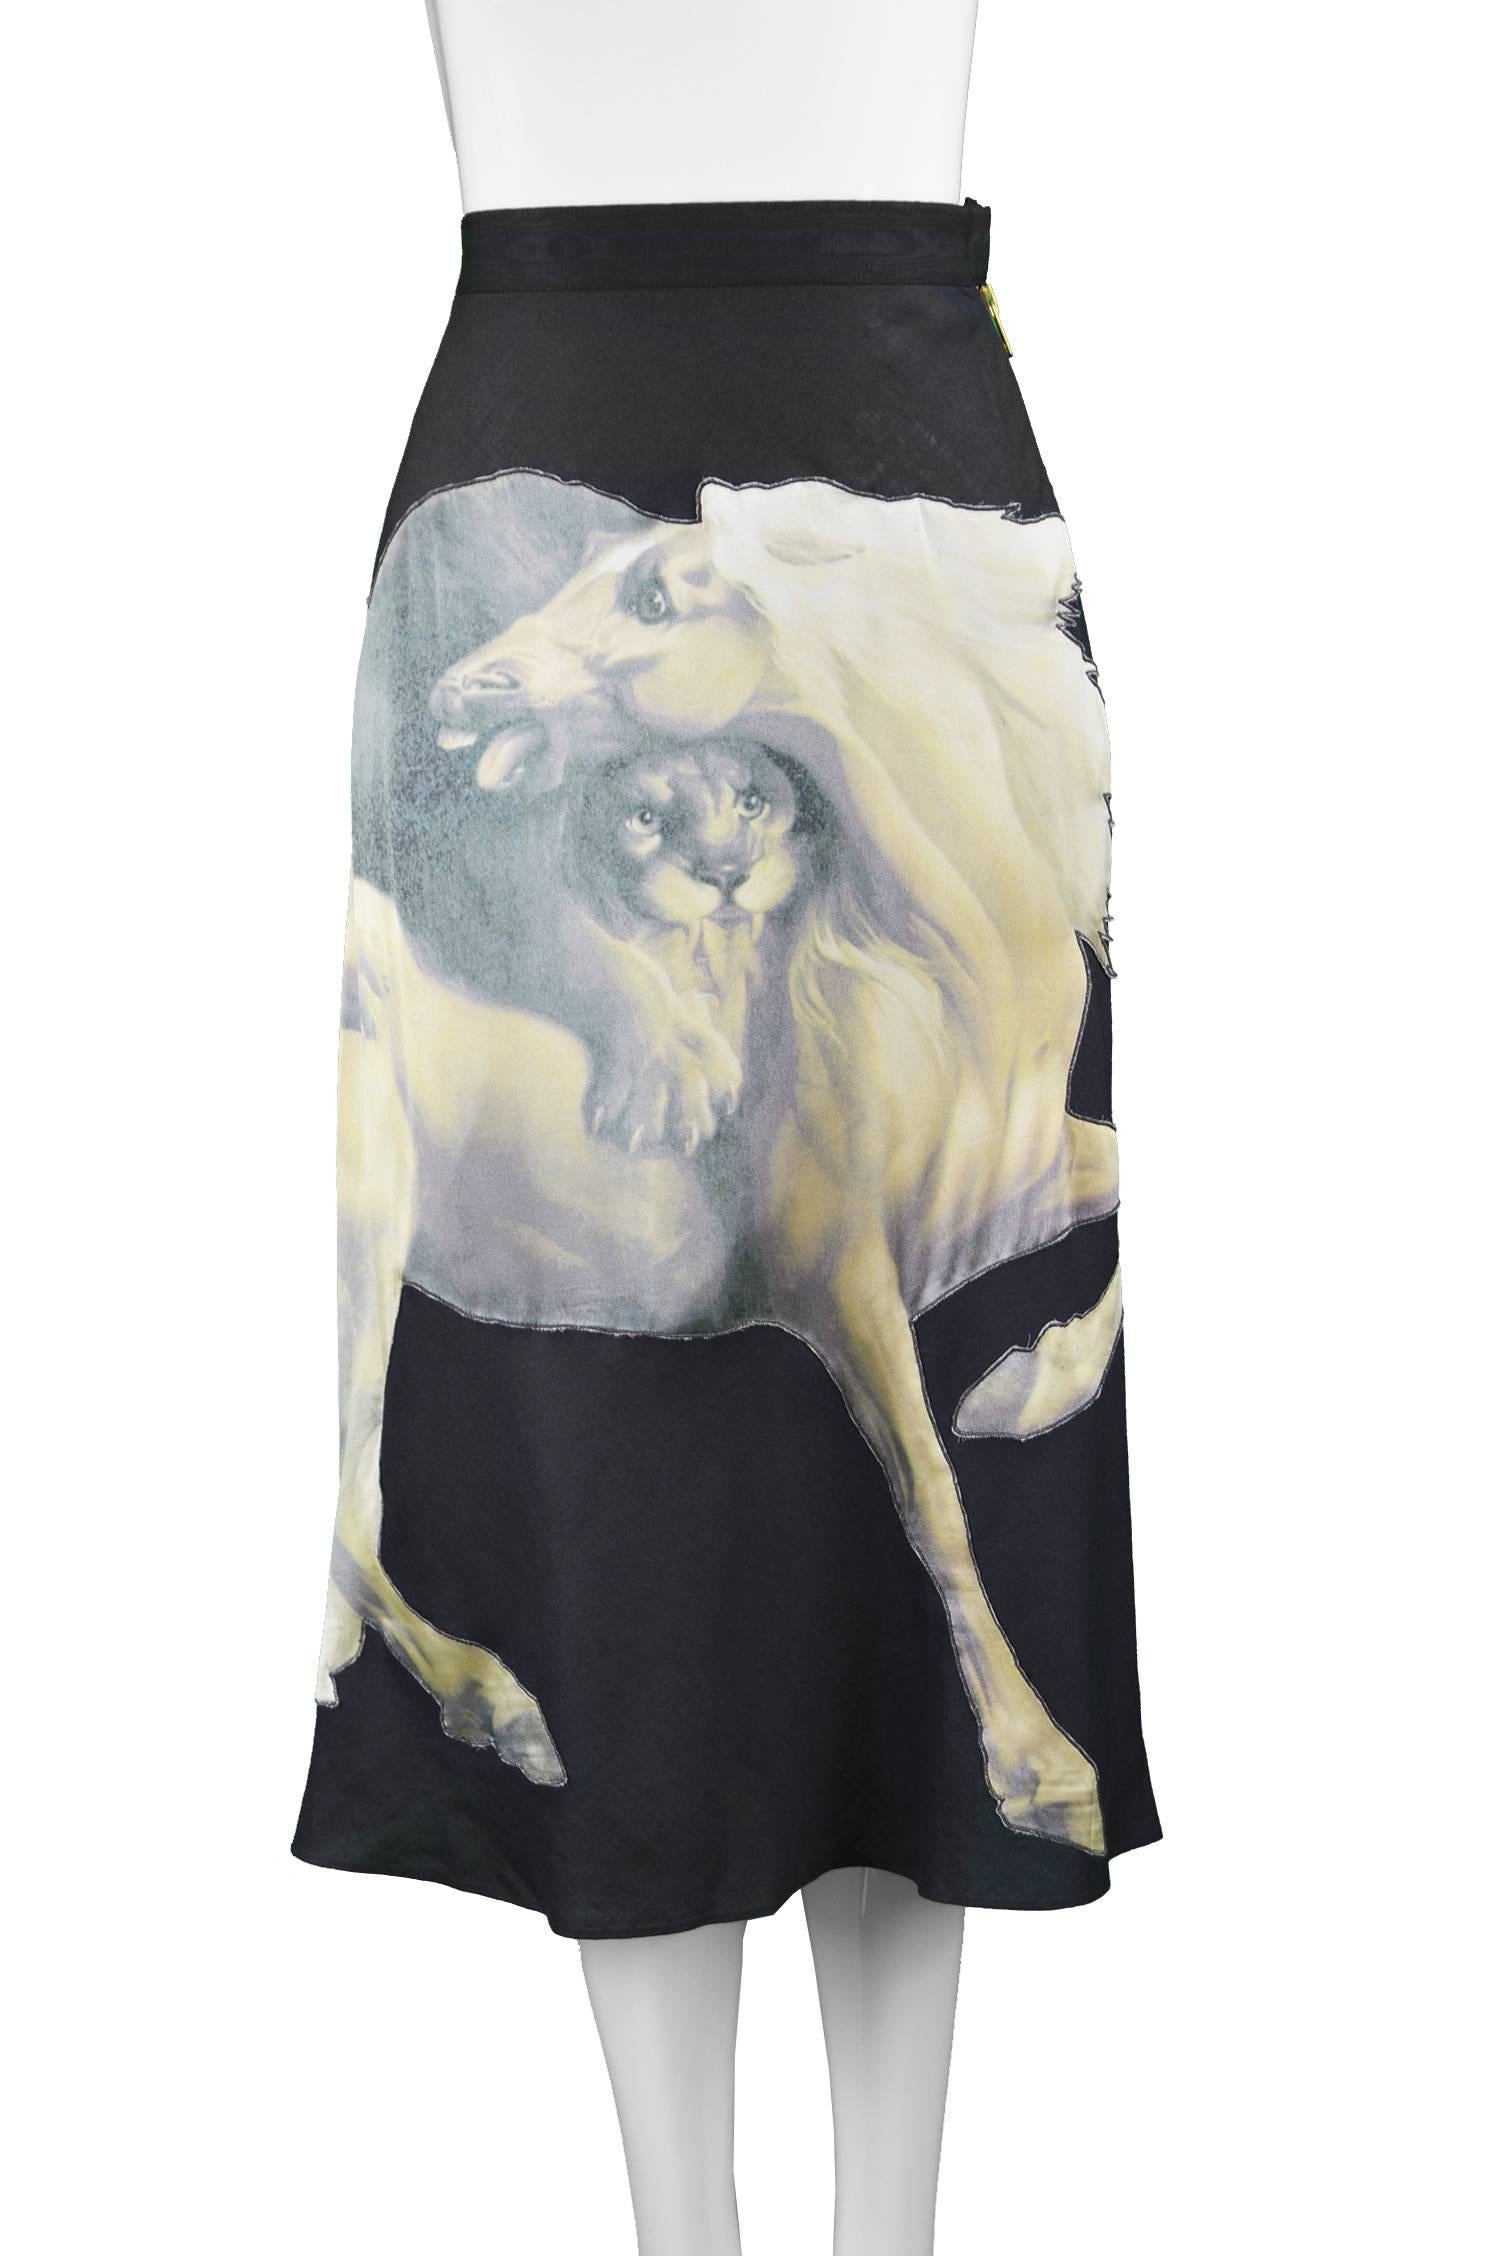 Gray Chloe by Stella McCartney Skirt with George Stubbs Horse Appliqué, S/S 2001